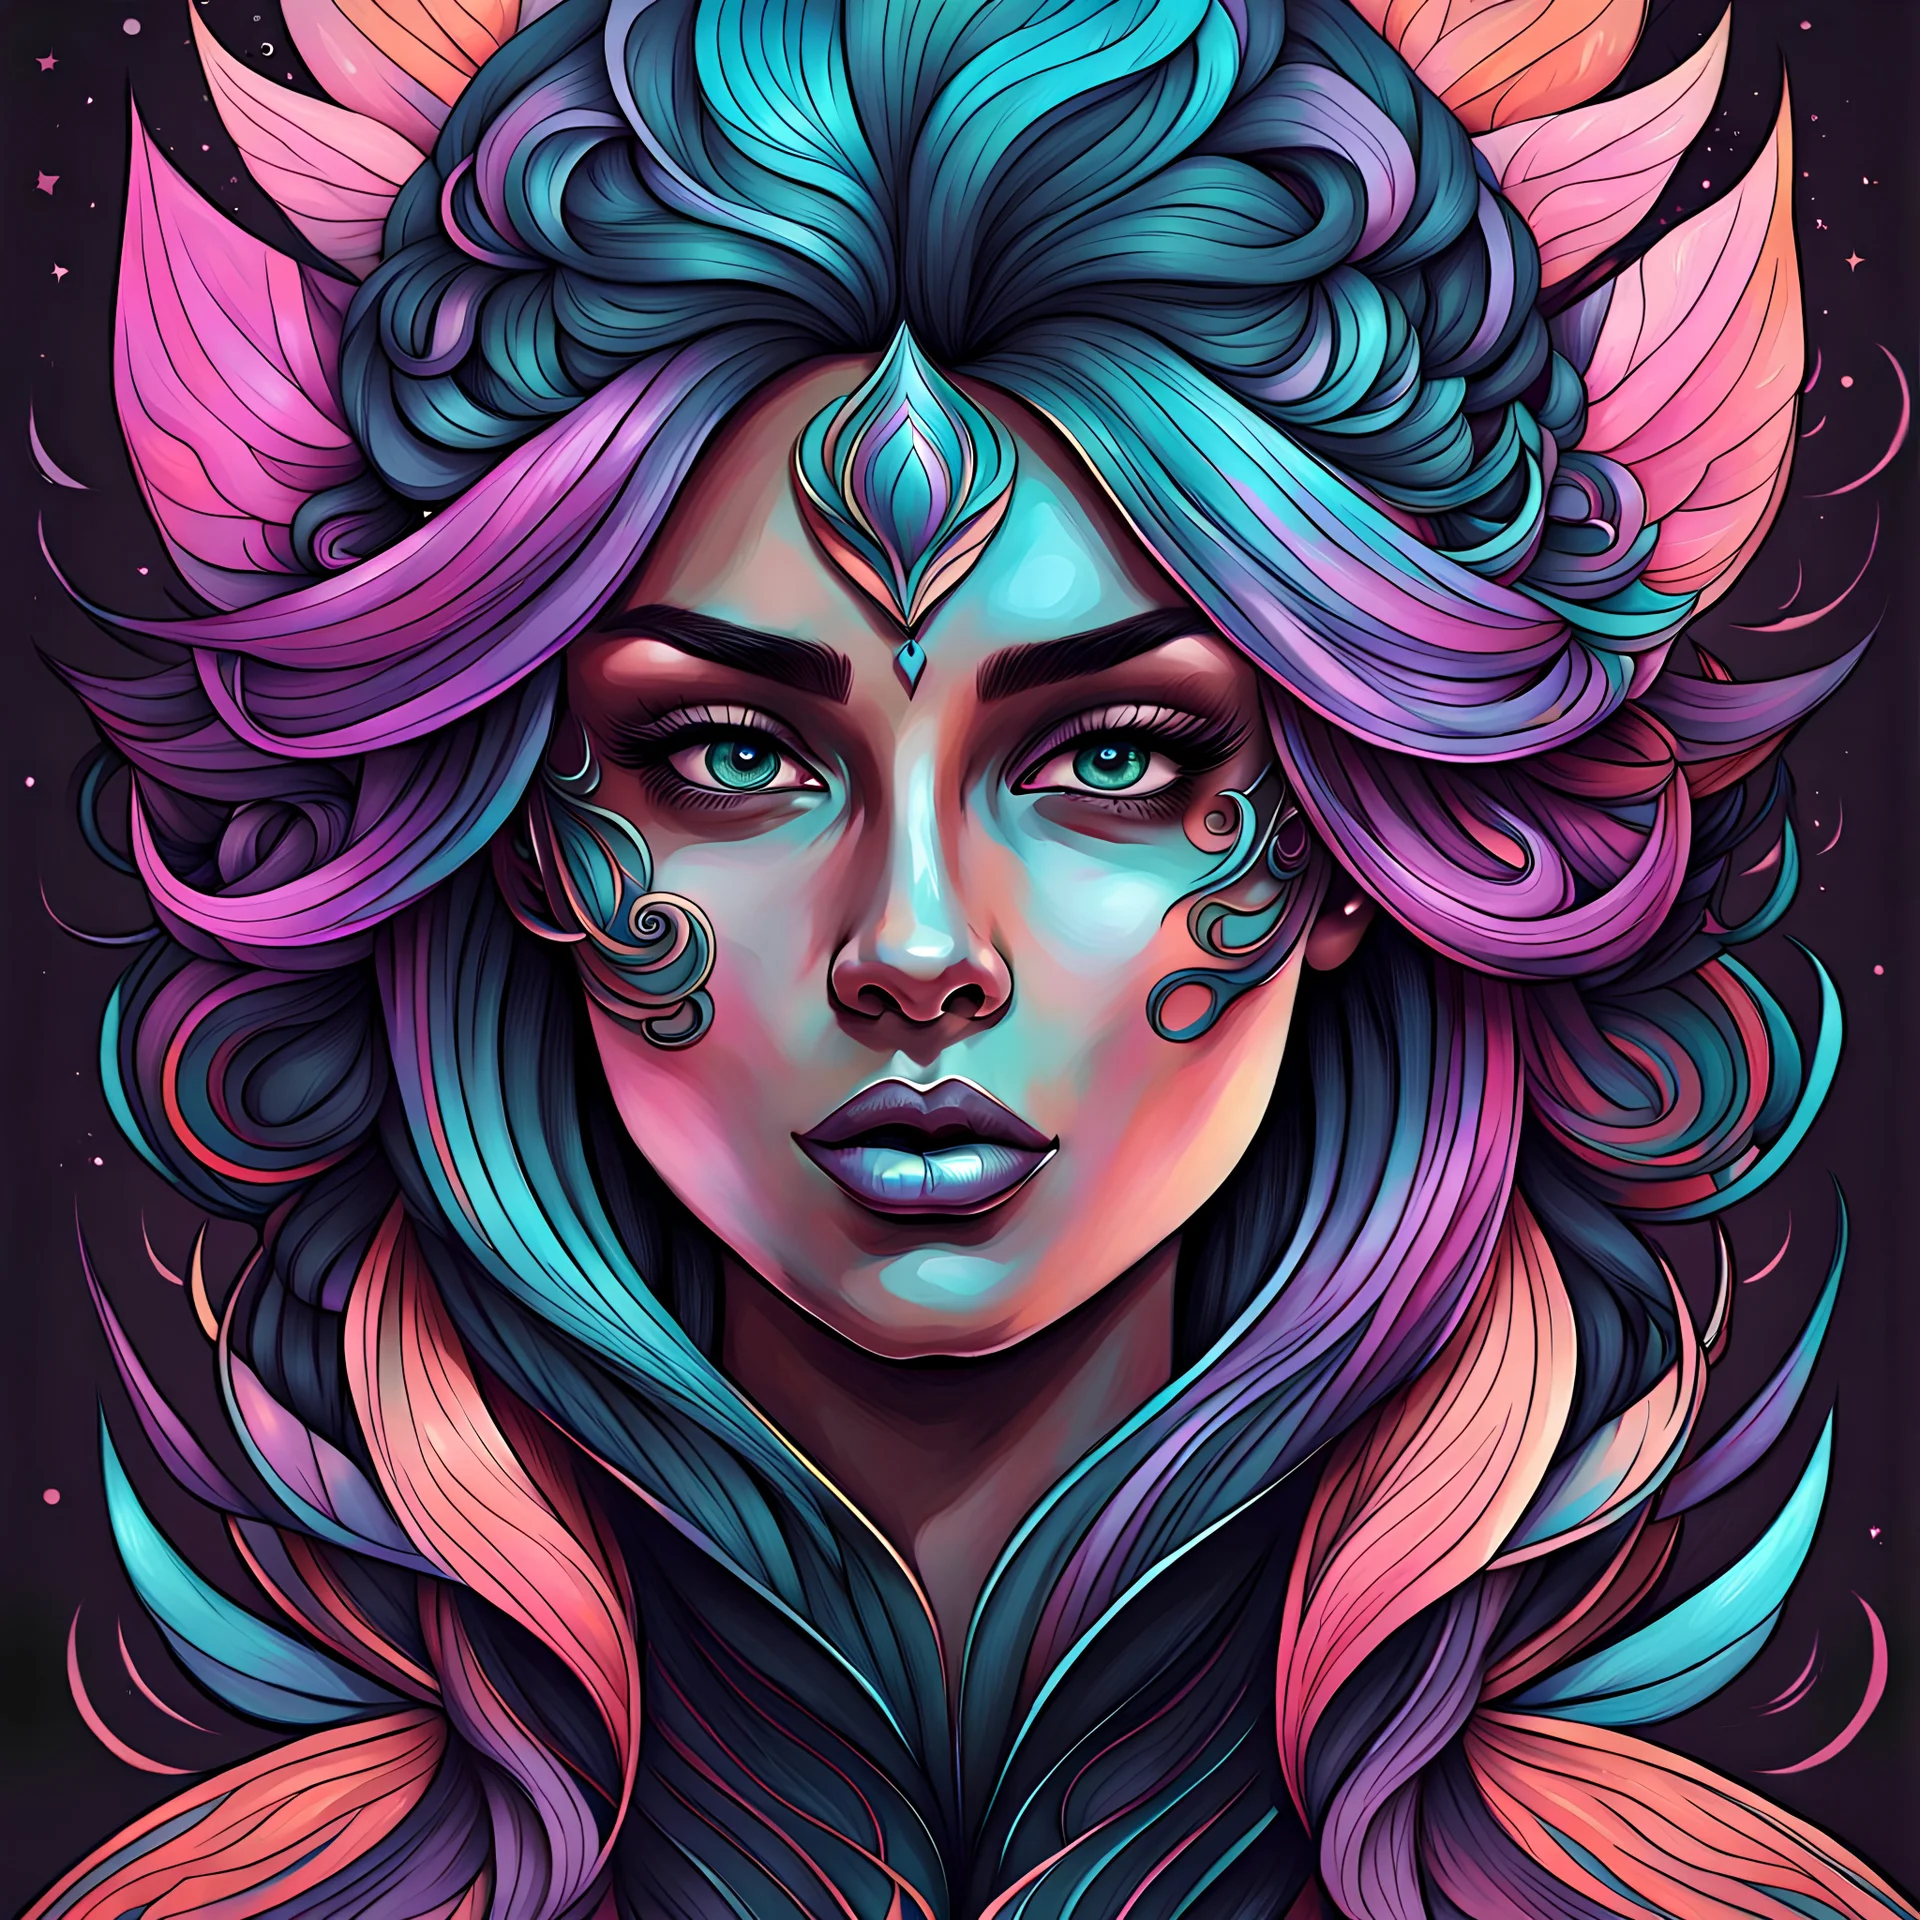 create a wildly imaginative female character illustration with highly detailed facial features , sharply defined, boldly lined, in muted dark pastel colors